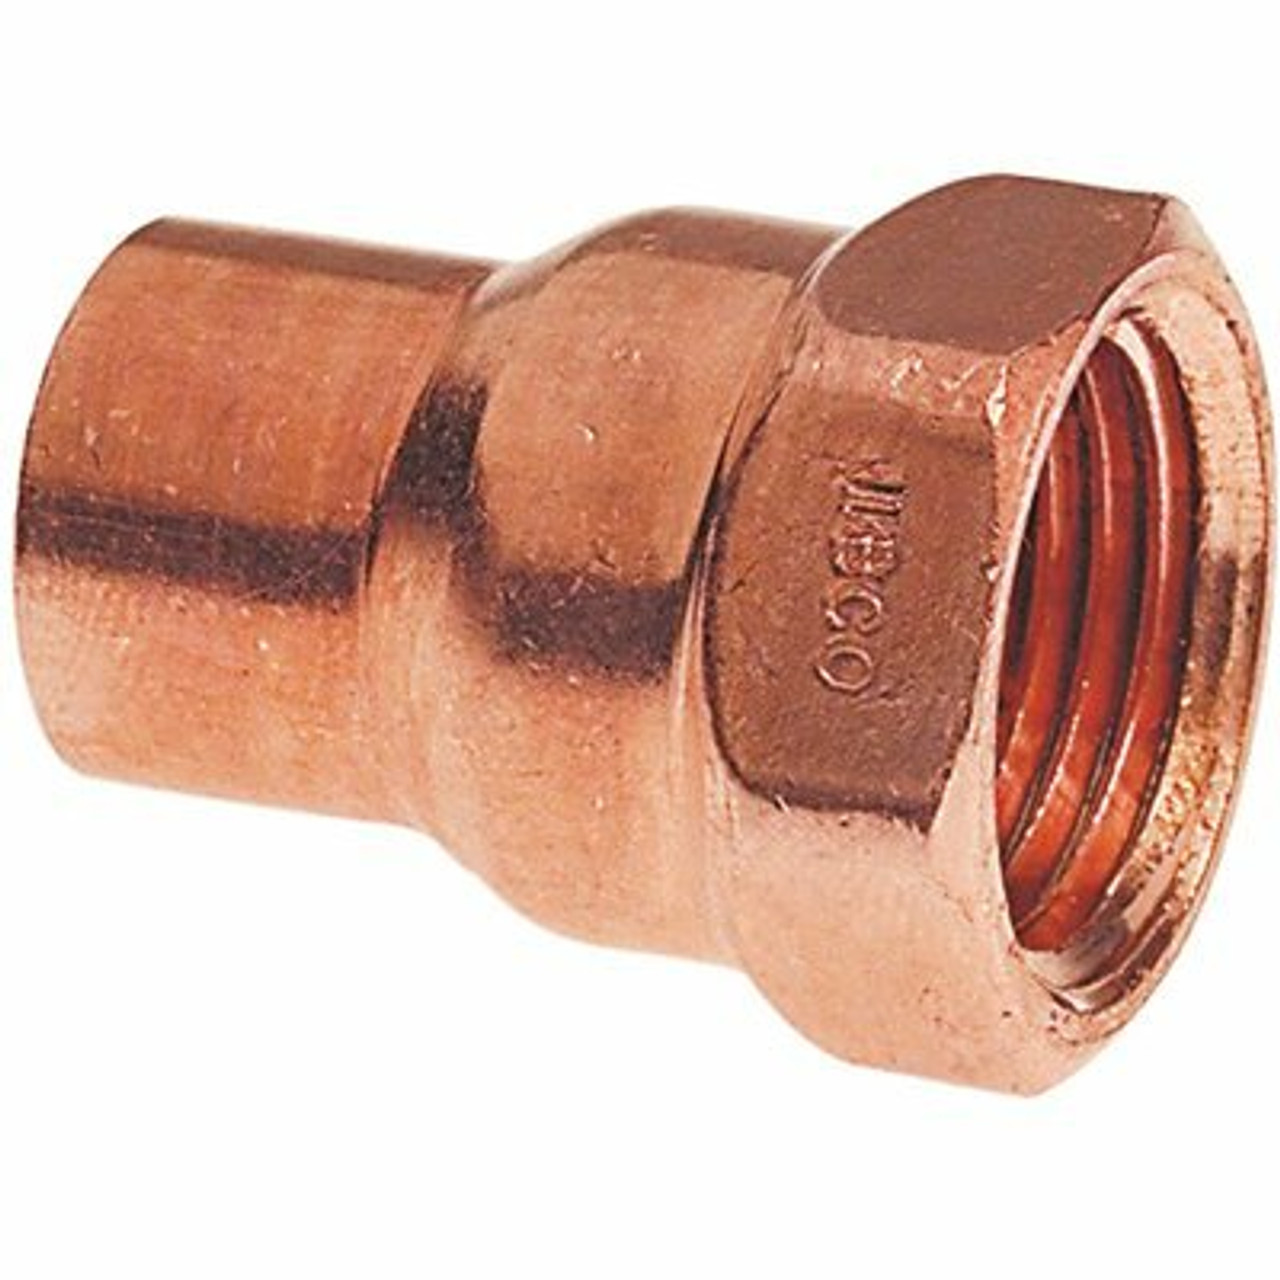 Nibco 1/2 In. Wrot Copper Cup X Fip Adapter Pro Pack (30-Pack)